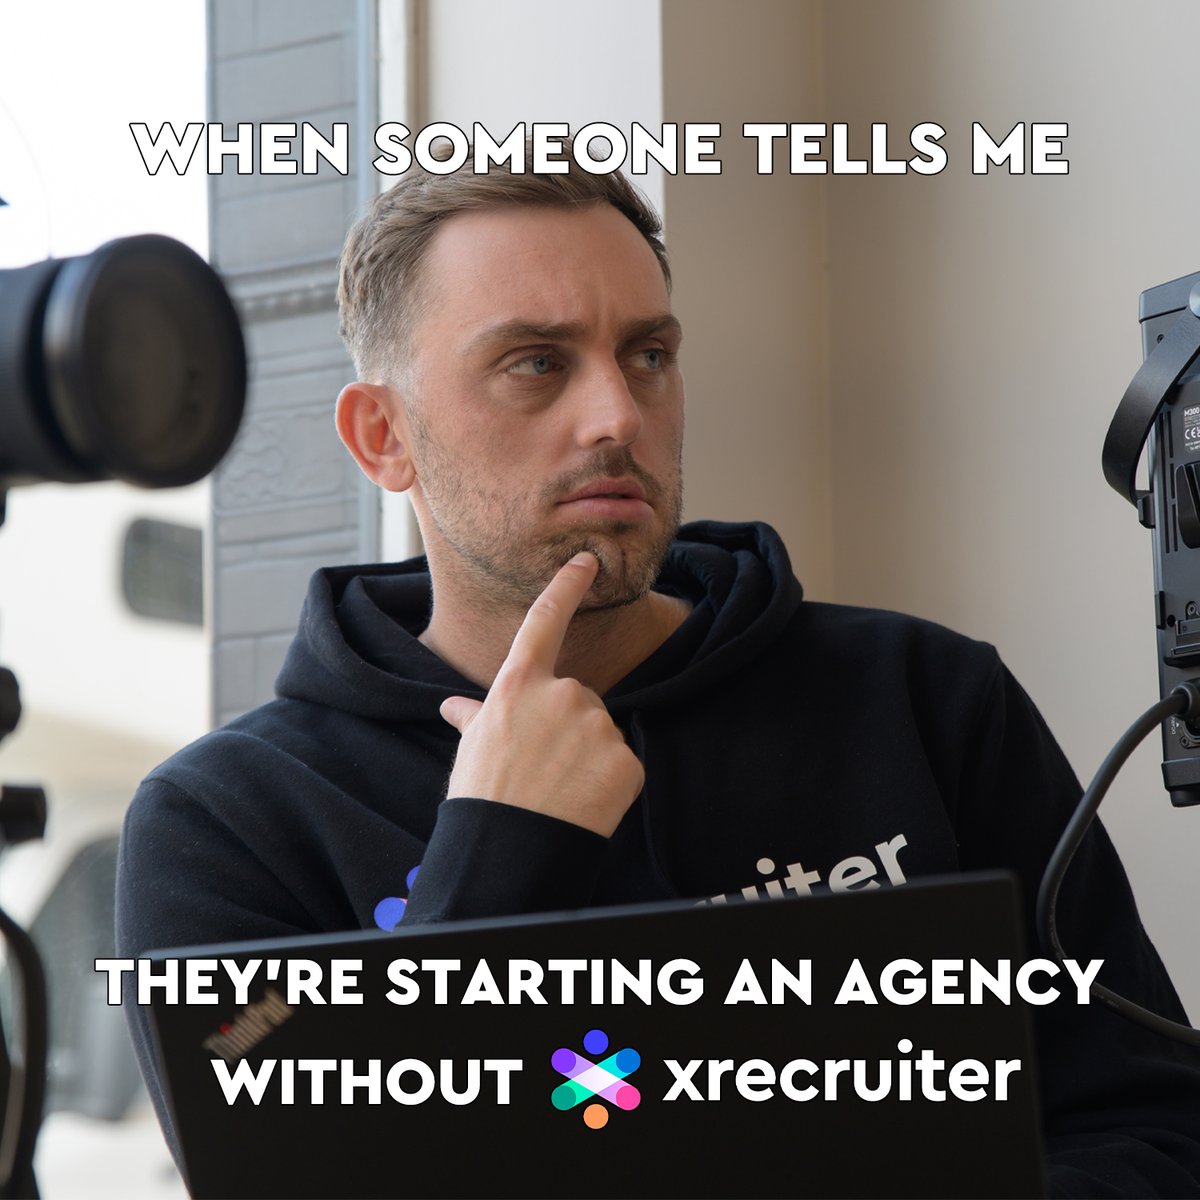 Could you believe it 😱

We promise there's a better way! #bettertogether 🚀

#xrecruiter #recruitment #funnyfriday #recruitmentmeme #seriouslythough